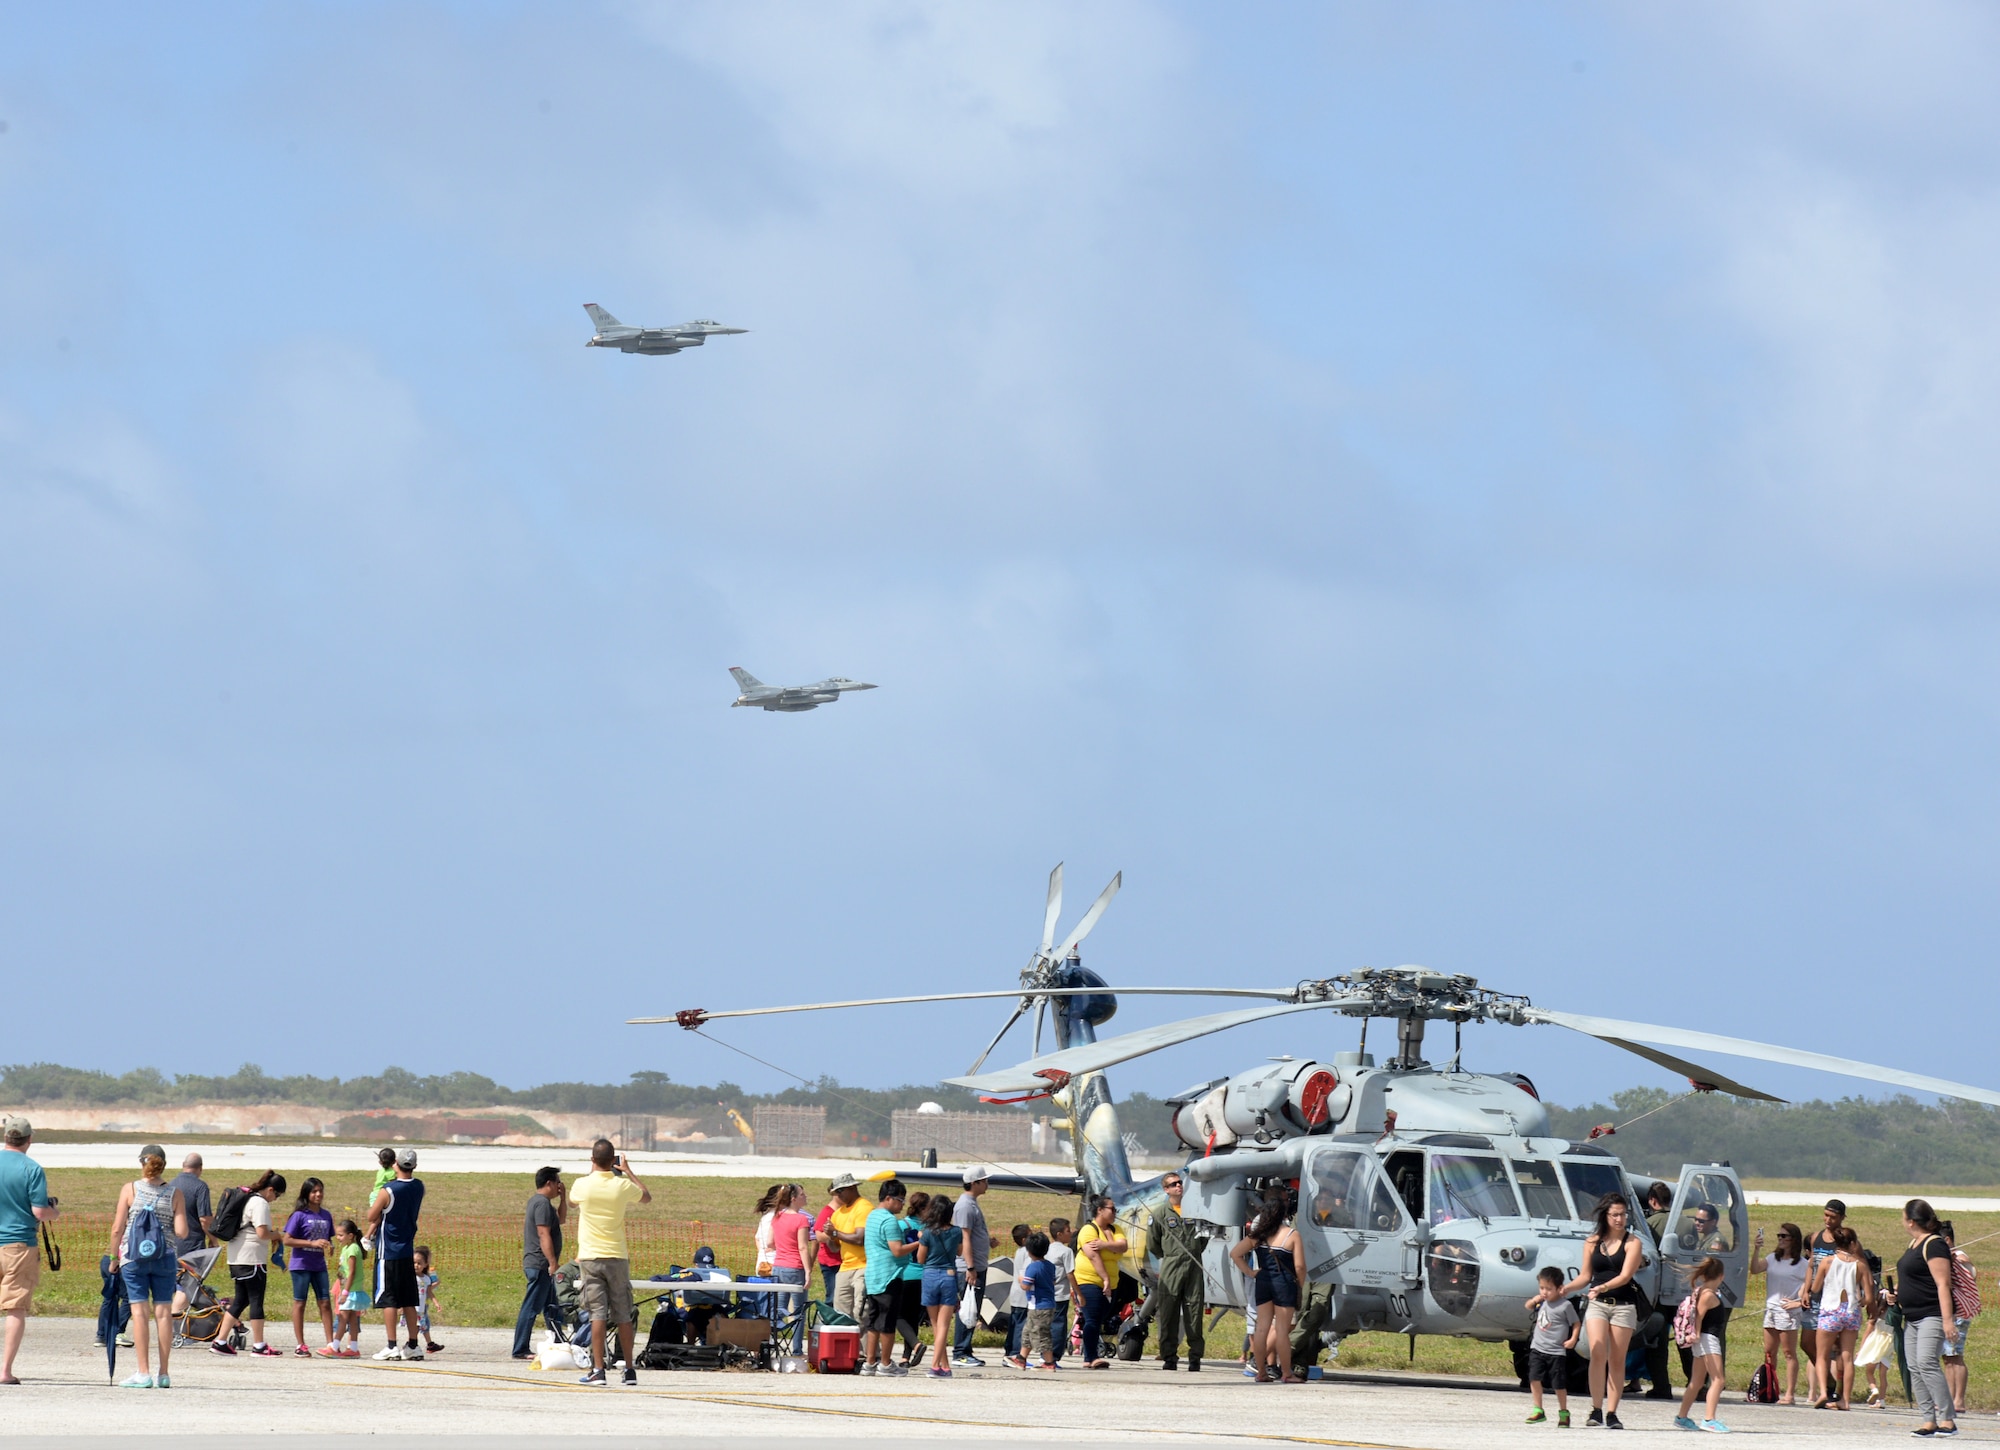 F-16 Fighting Falcons fly over the flightline Feb. 20 during the 2016 Pacific Air Partners Open House at Andersen Air Force Base, Guam.  The largest community outreach event of the year, the open house aimed to enhance public awareness of the U.S. military's mission, equipment, facilities and personnel and to promote positive community relations. (U.S. Air Force photo/Senior Airman Joshua Smoot)